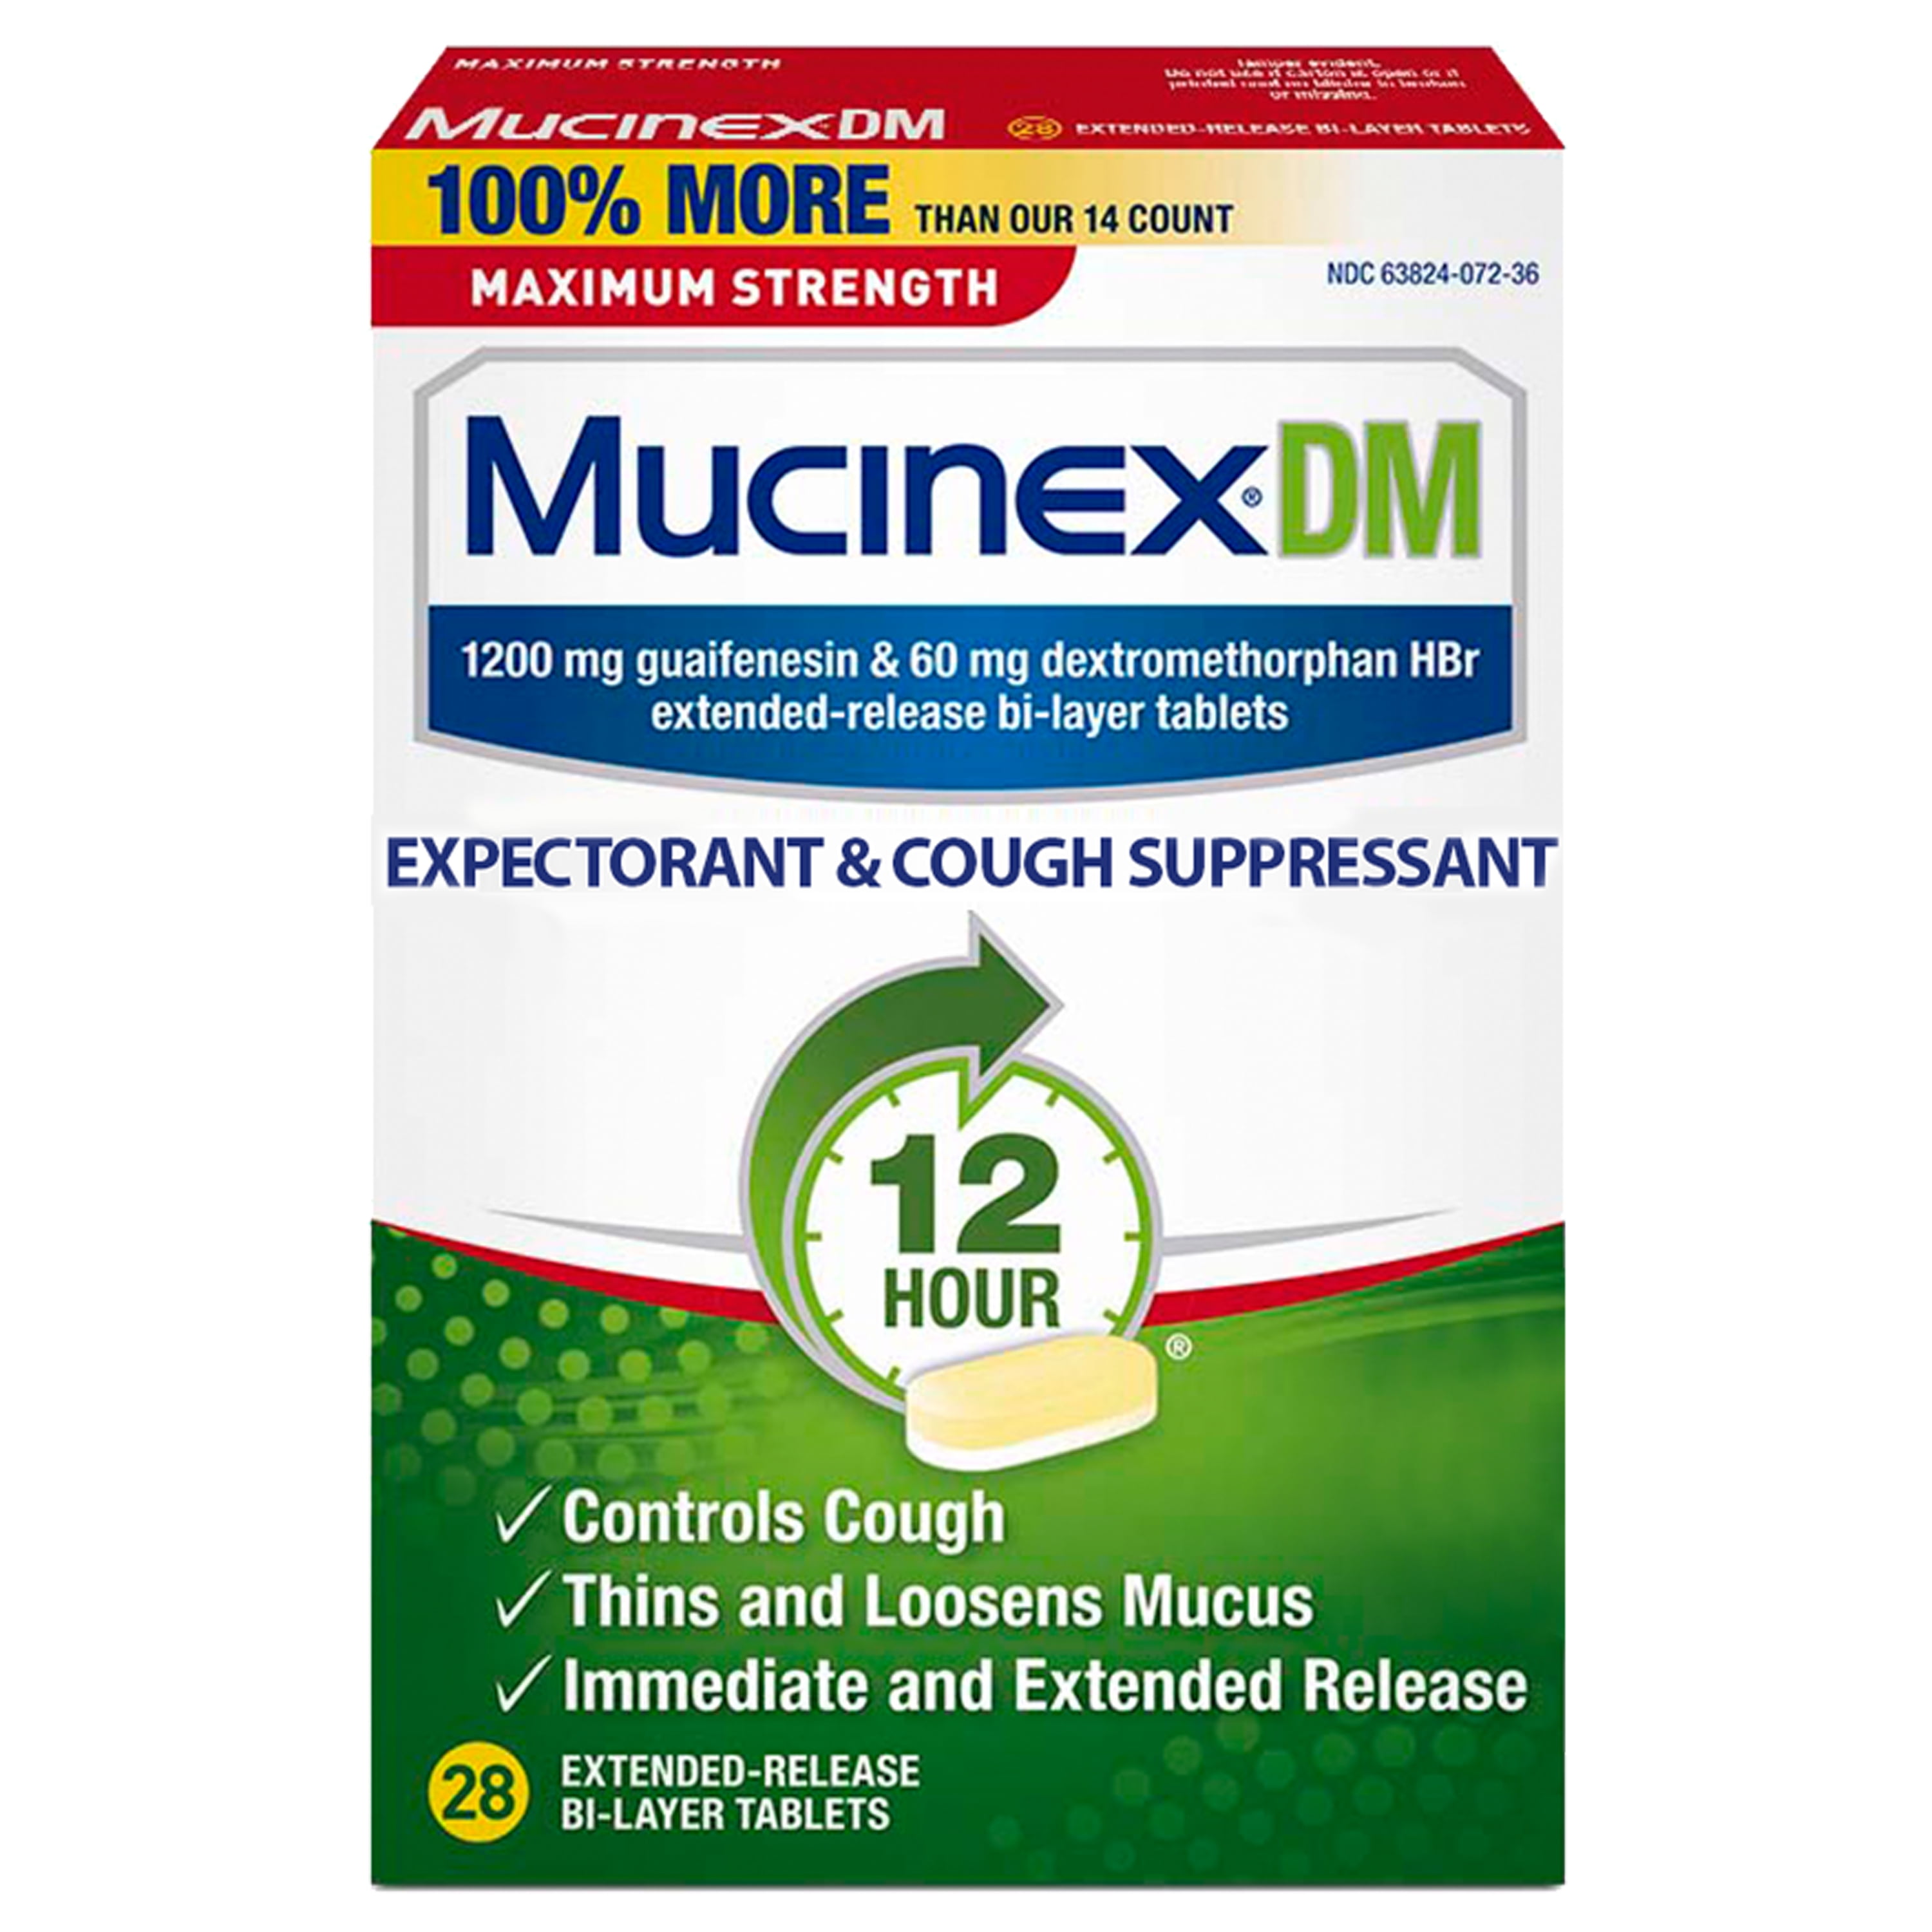 Mucinex Dm 12 Hour Maximum Strength Expectorant And Cough Suppressant Tablets 28 Tablets